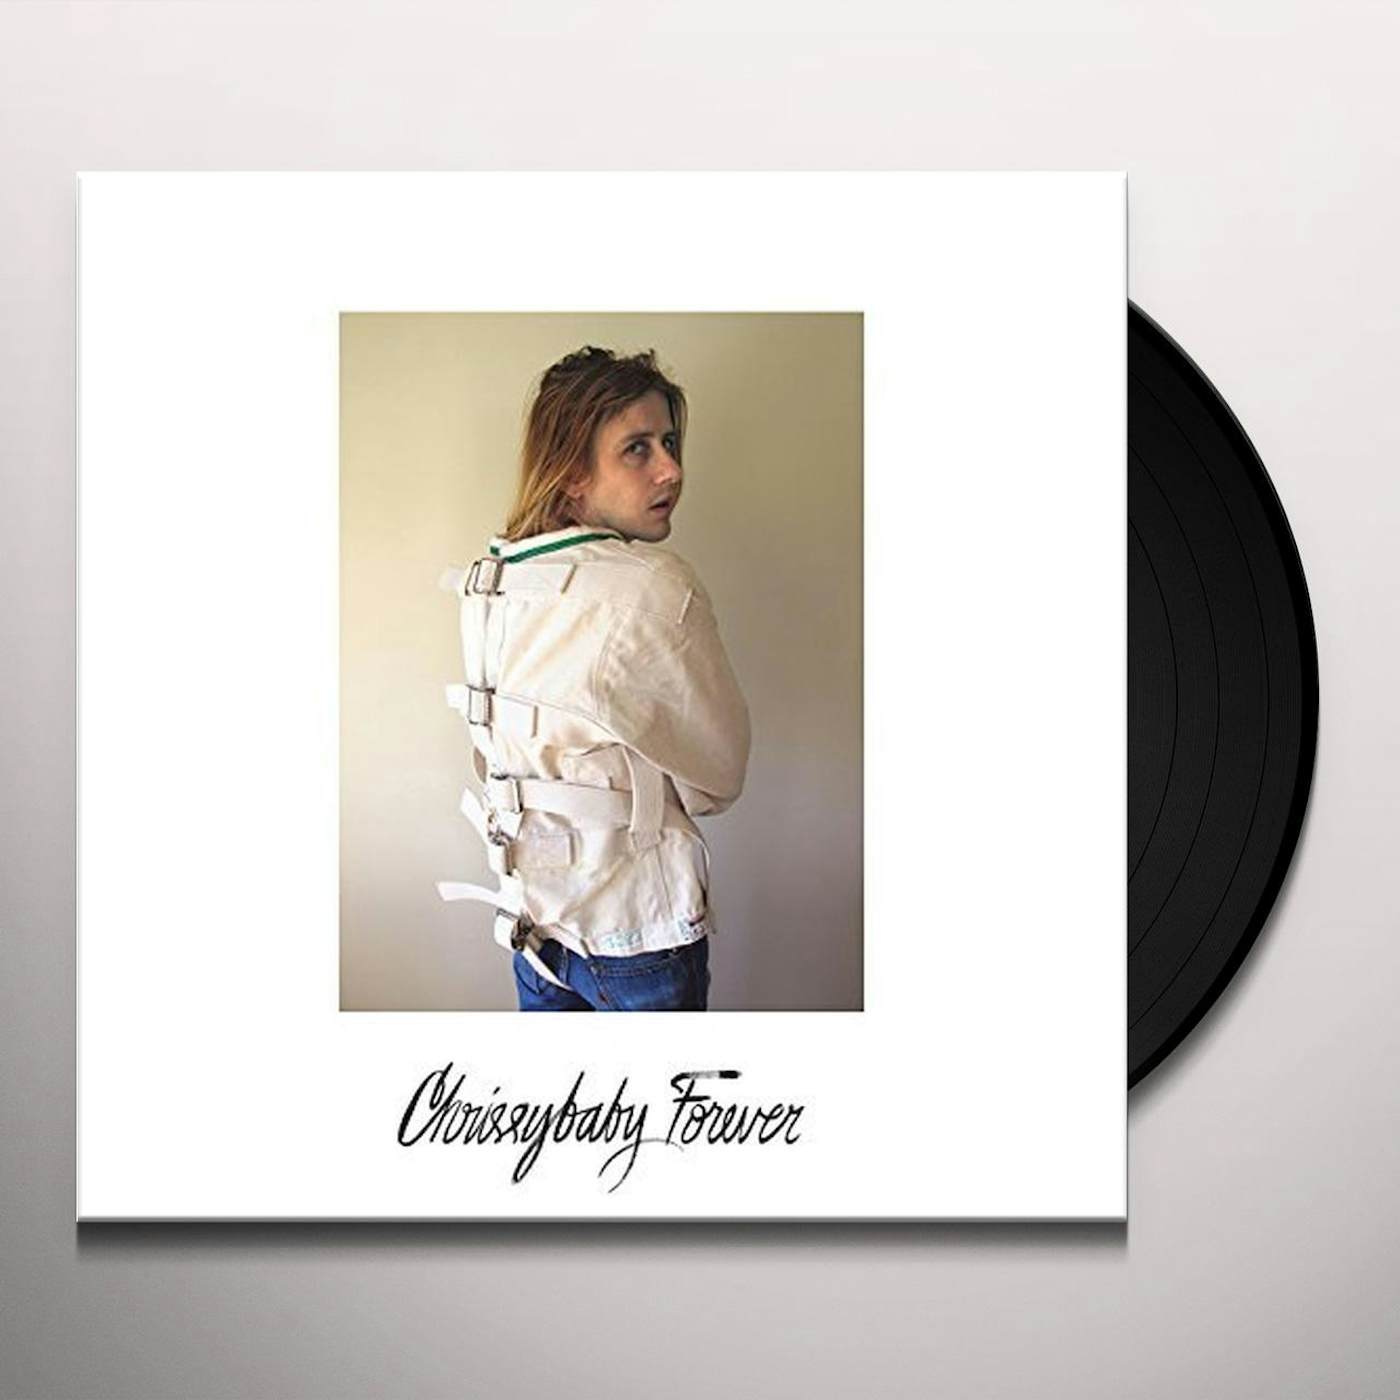 Christopher Owens CHRISSYBABY FOREVER Vinyl Record - UK Release